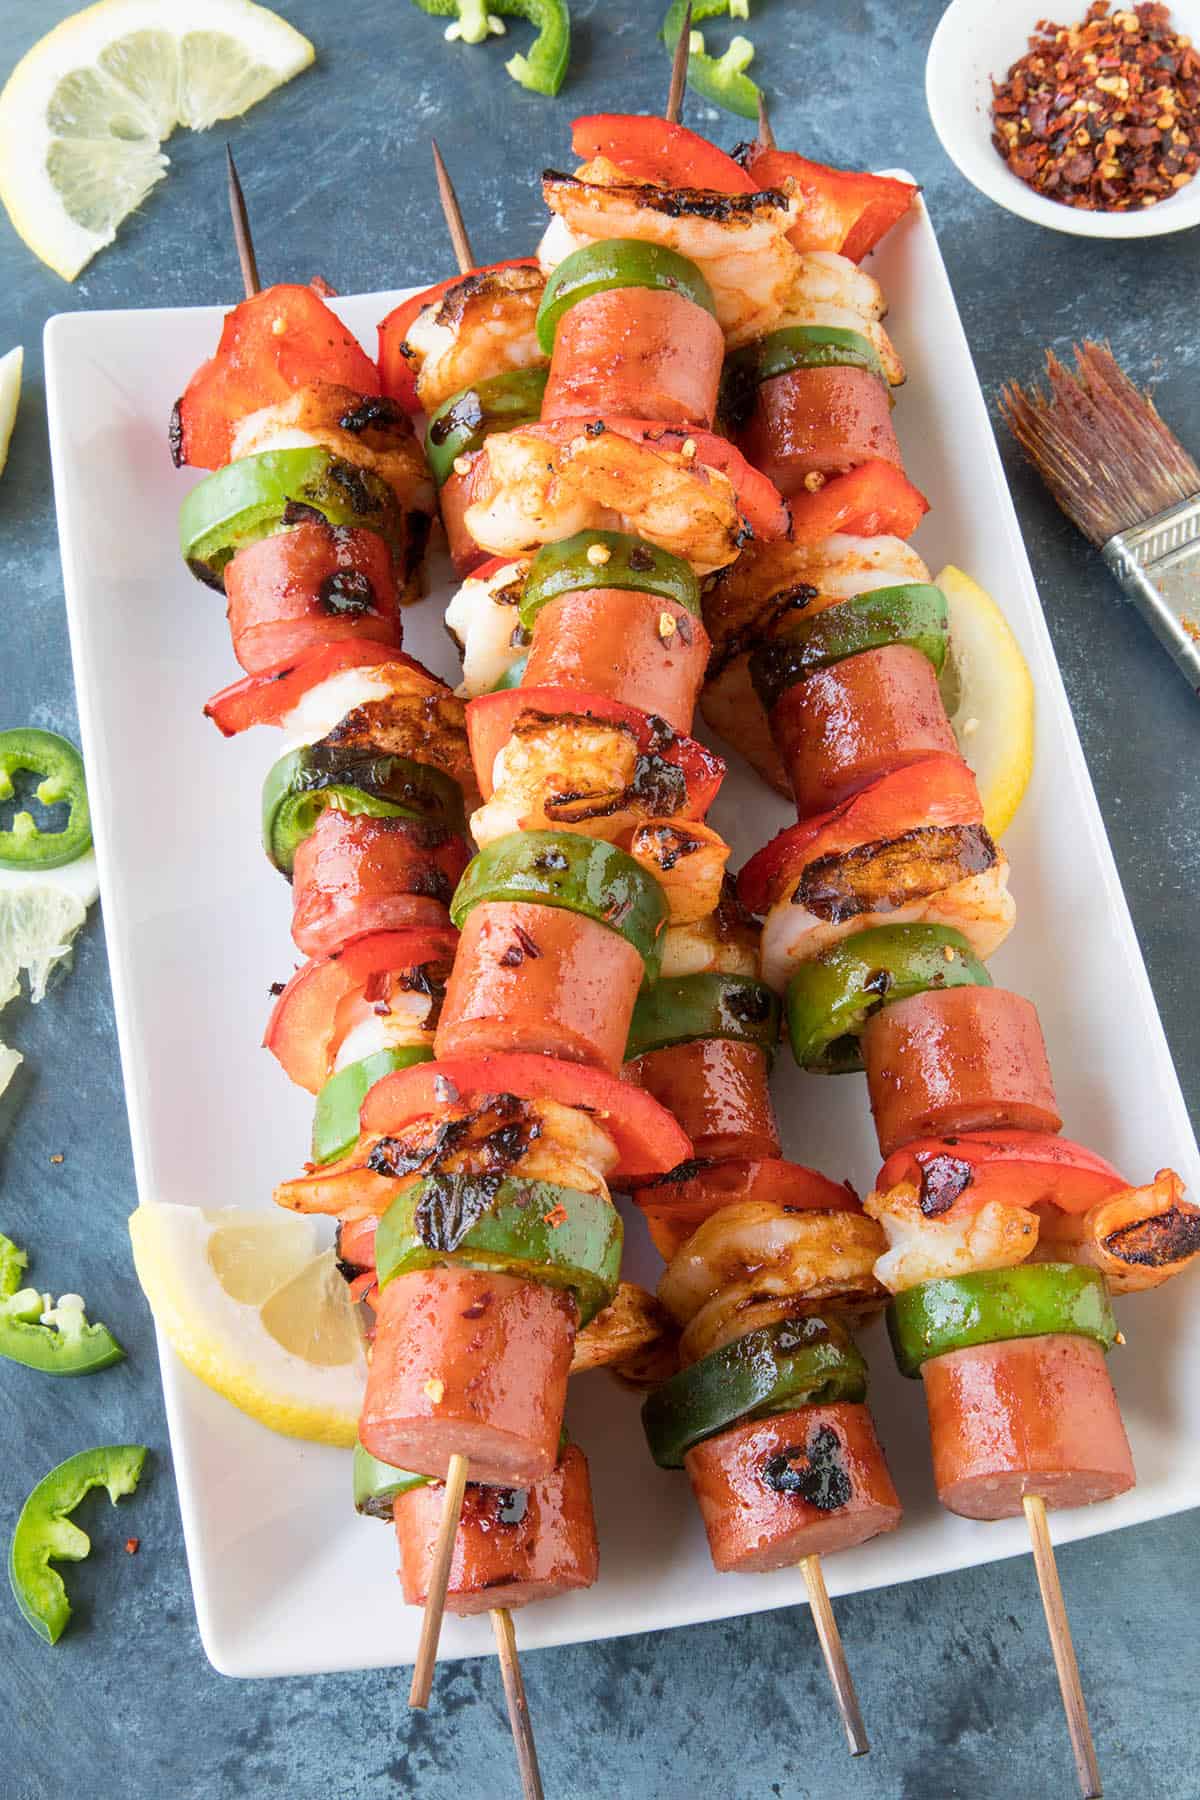 10 Minute Shrimp and Sausage Skewers - Served and Ready to Eat